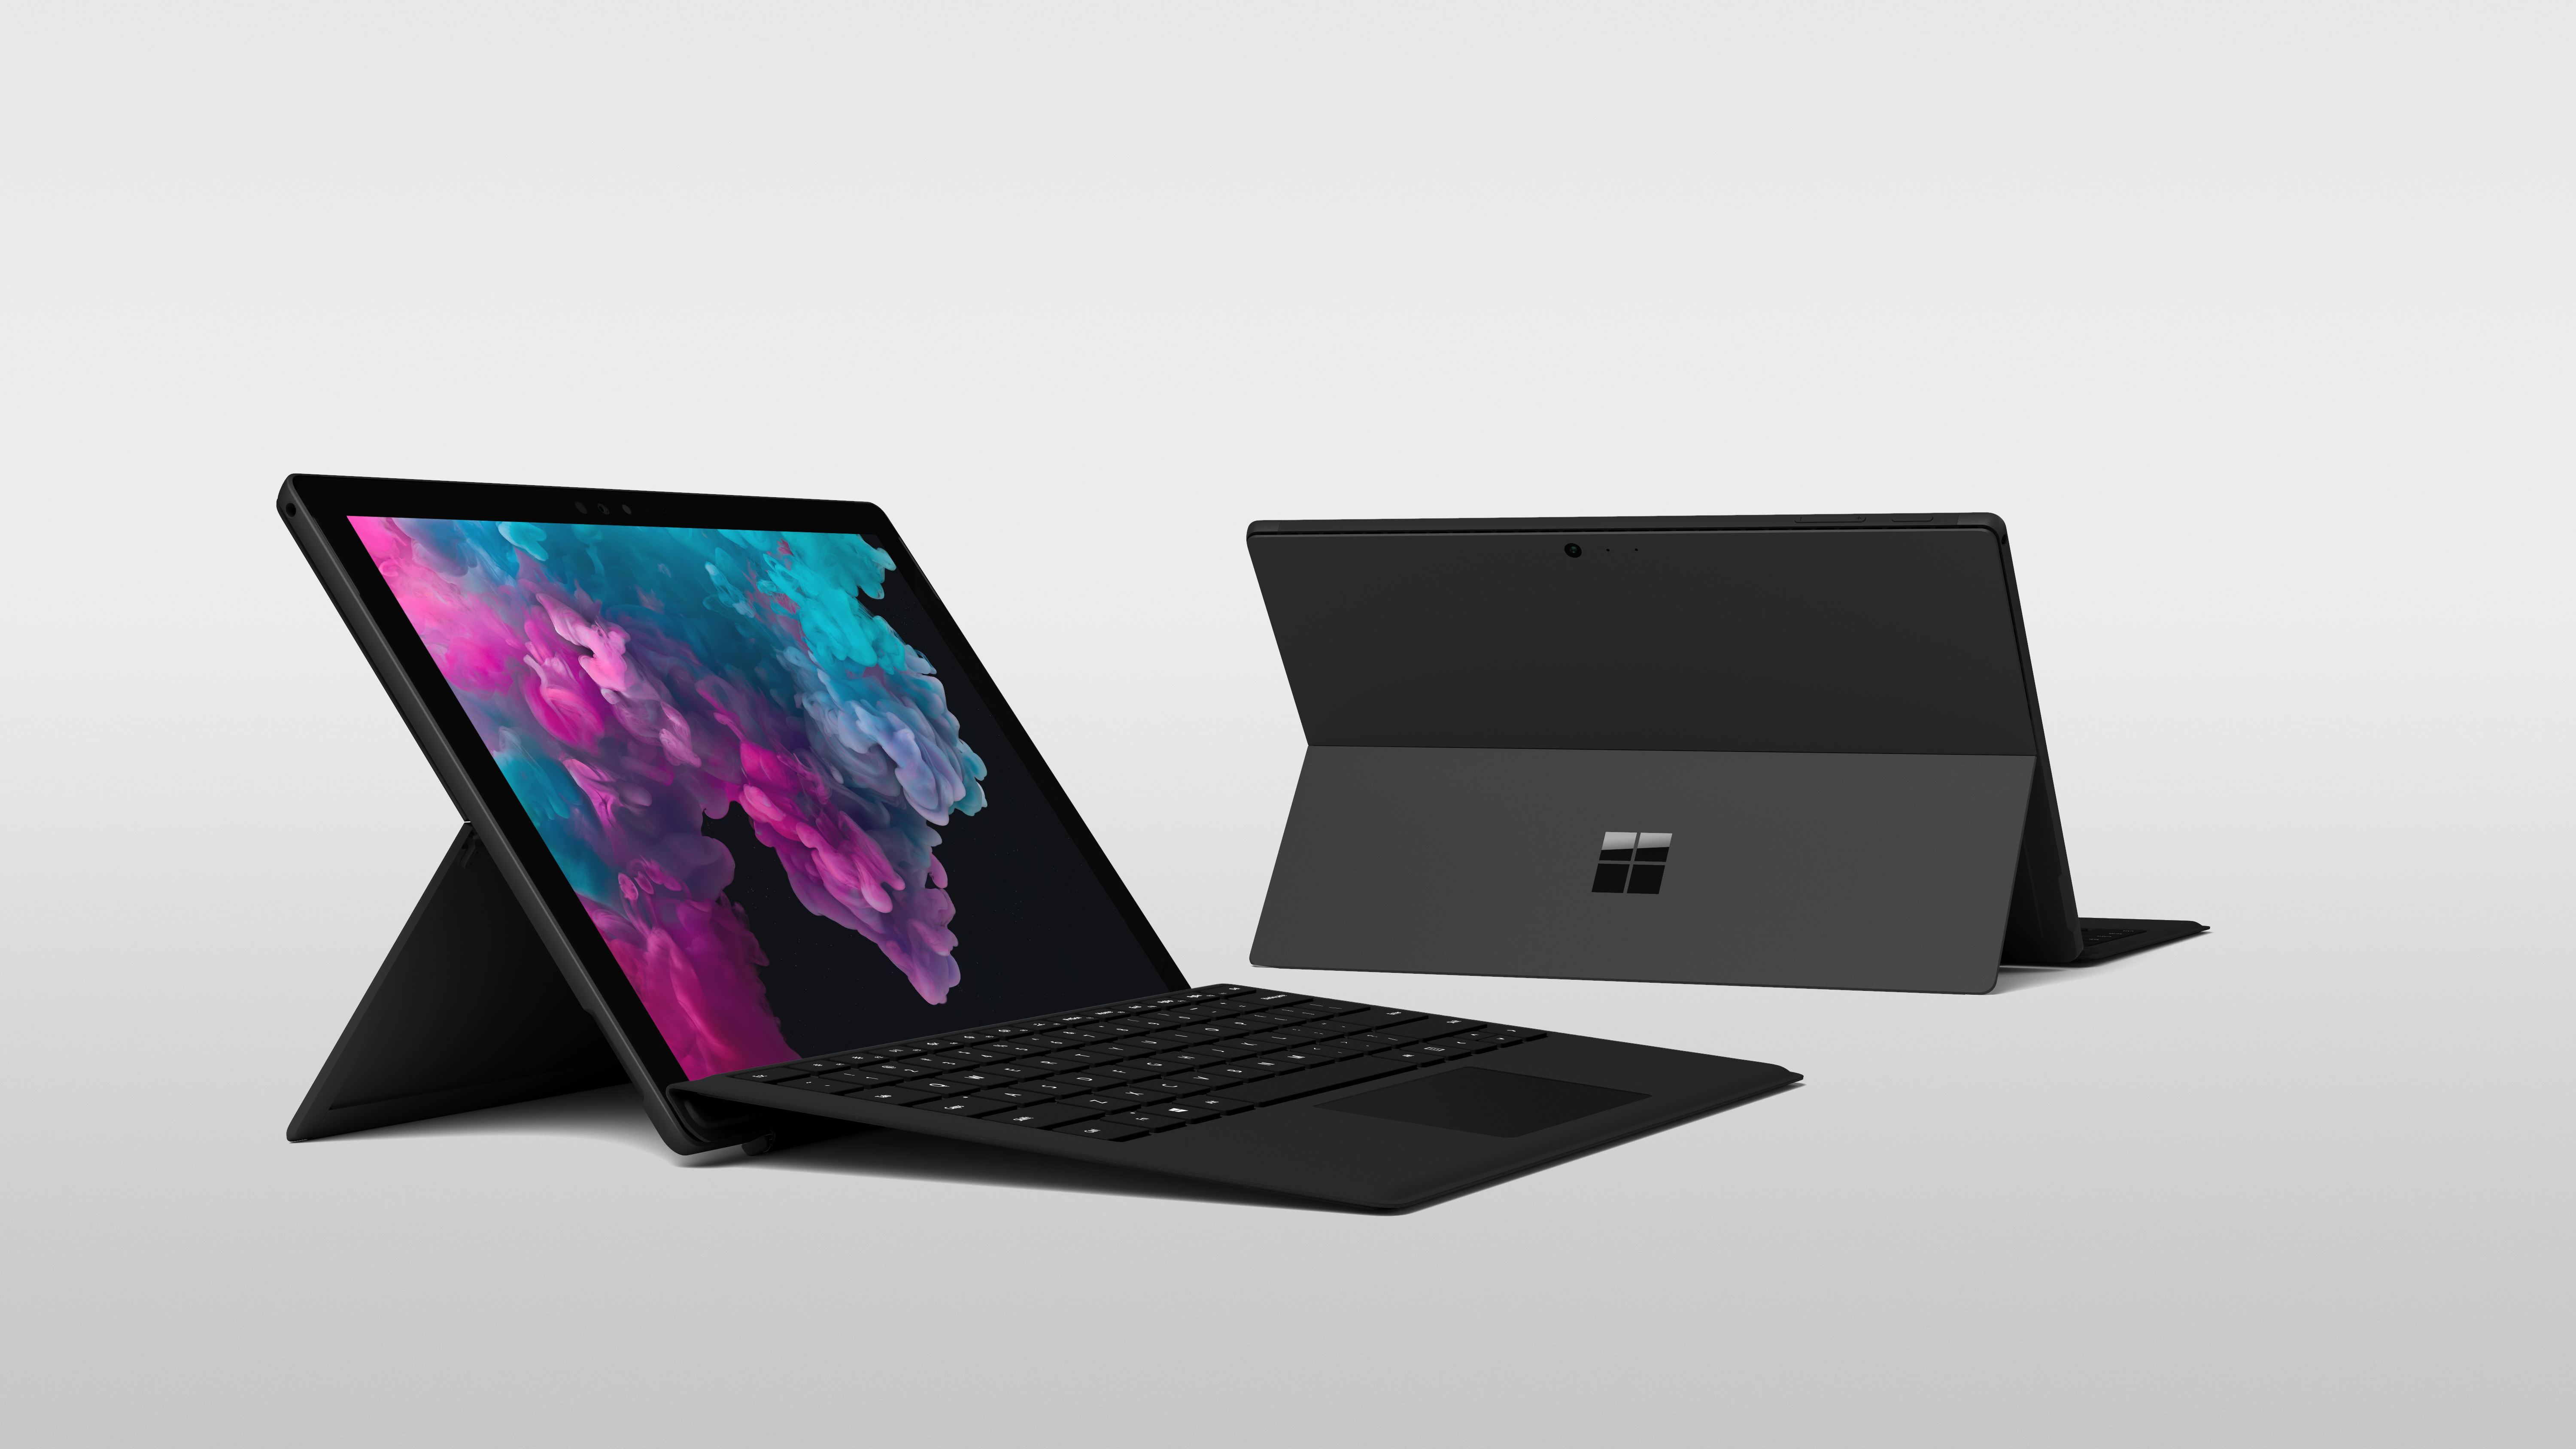 Surface Pro 6 and Surface Laptop 2: New internals, new color